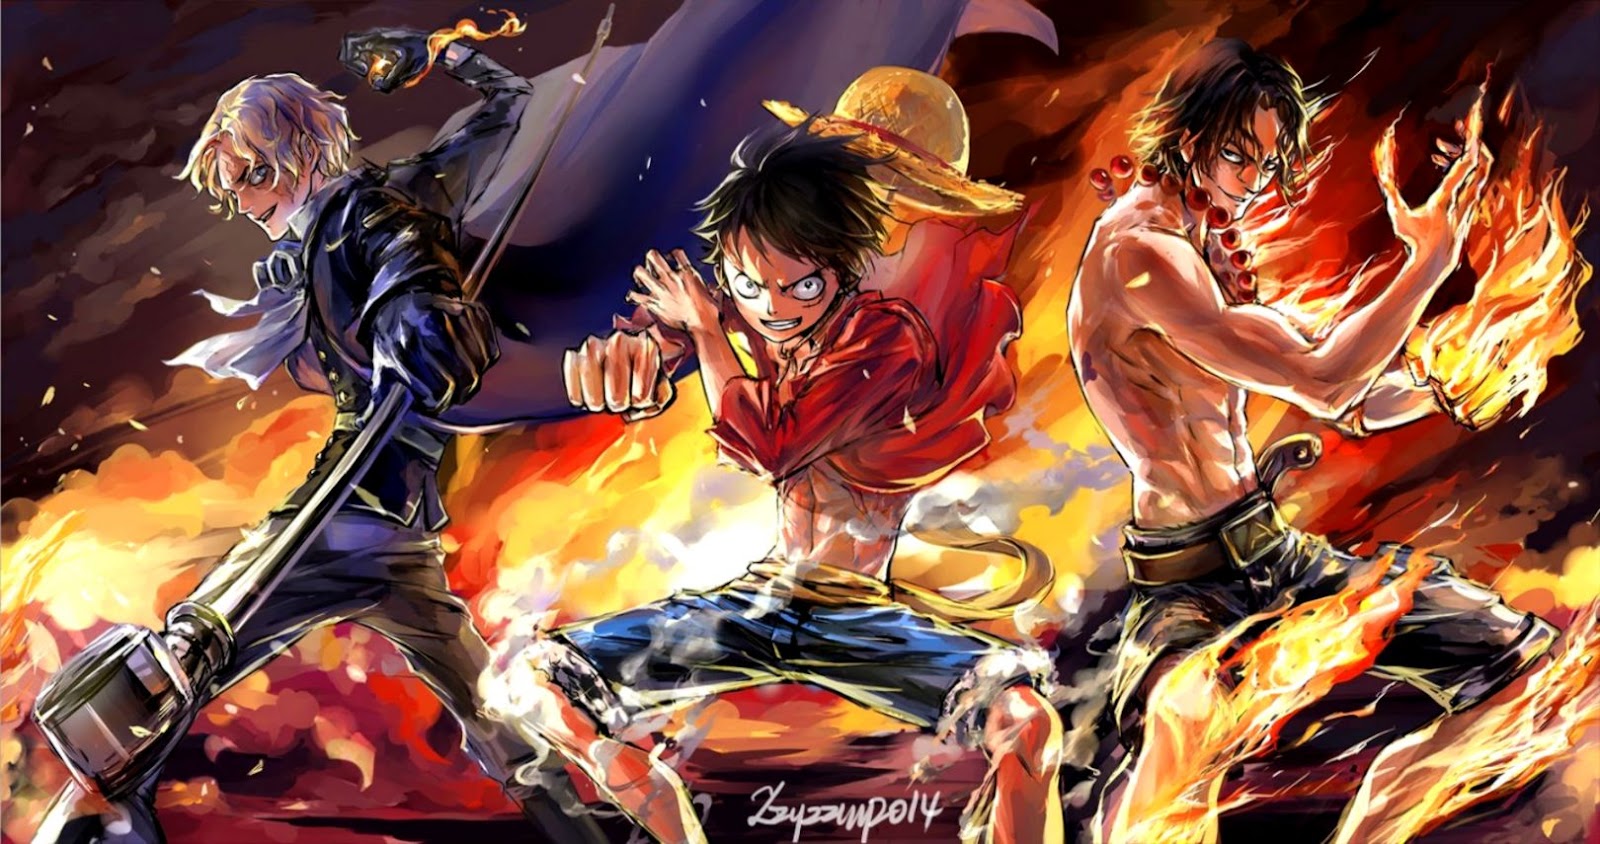 Wallpaper Luffy - Monkey D Luffy Wallpapers FansArt for Android - APK